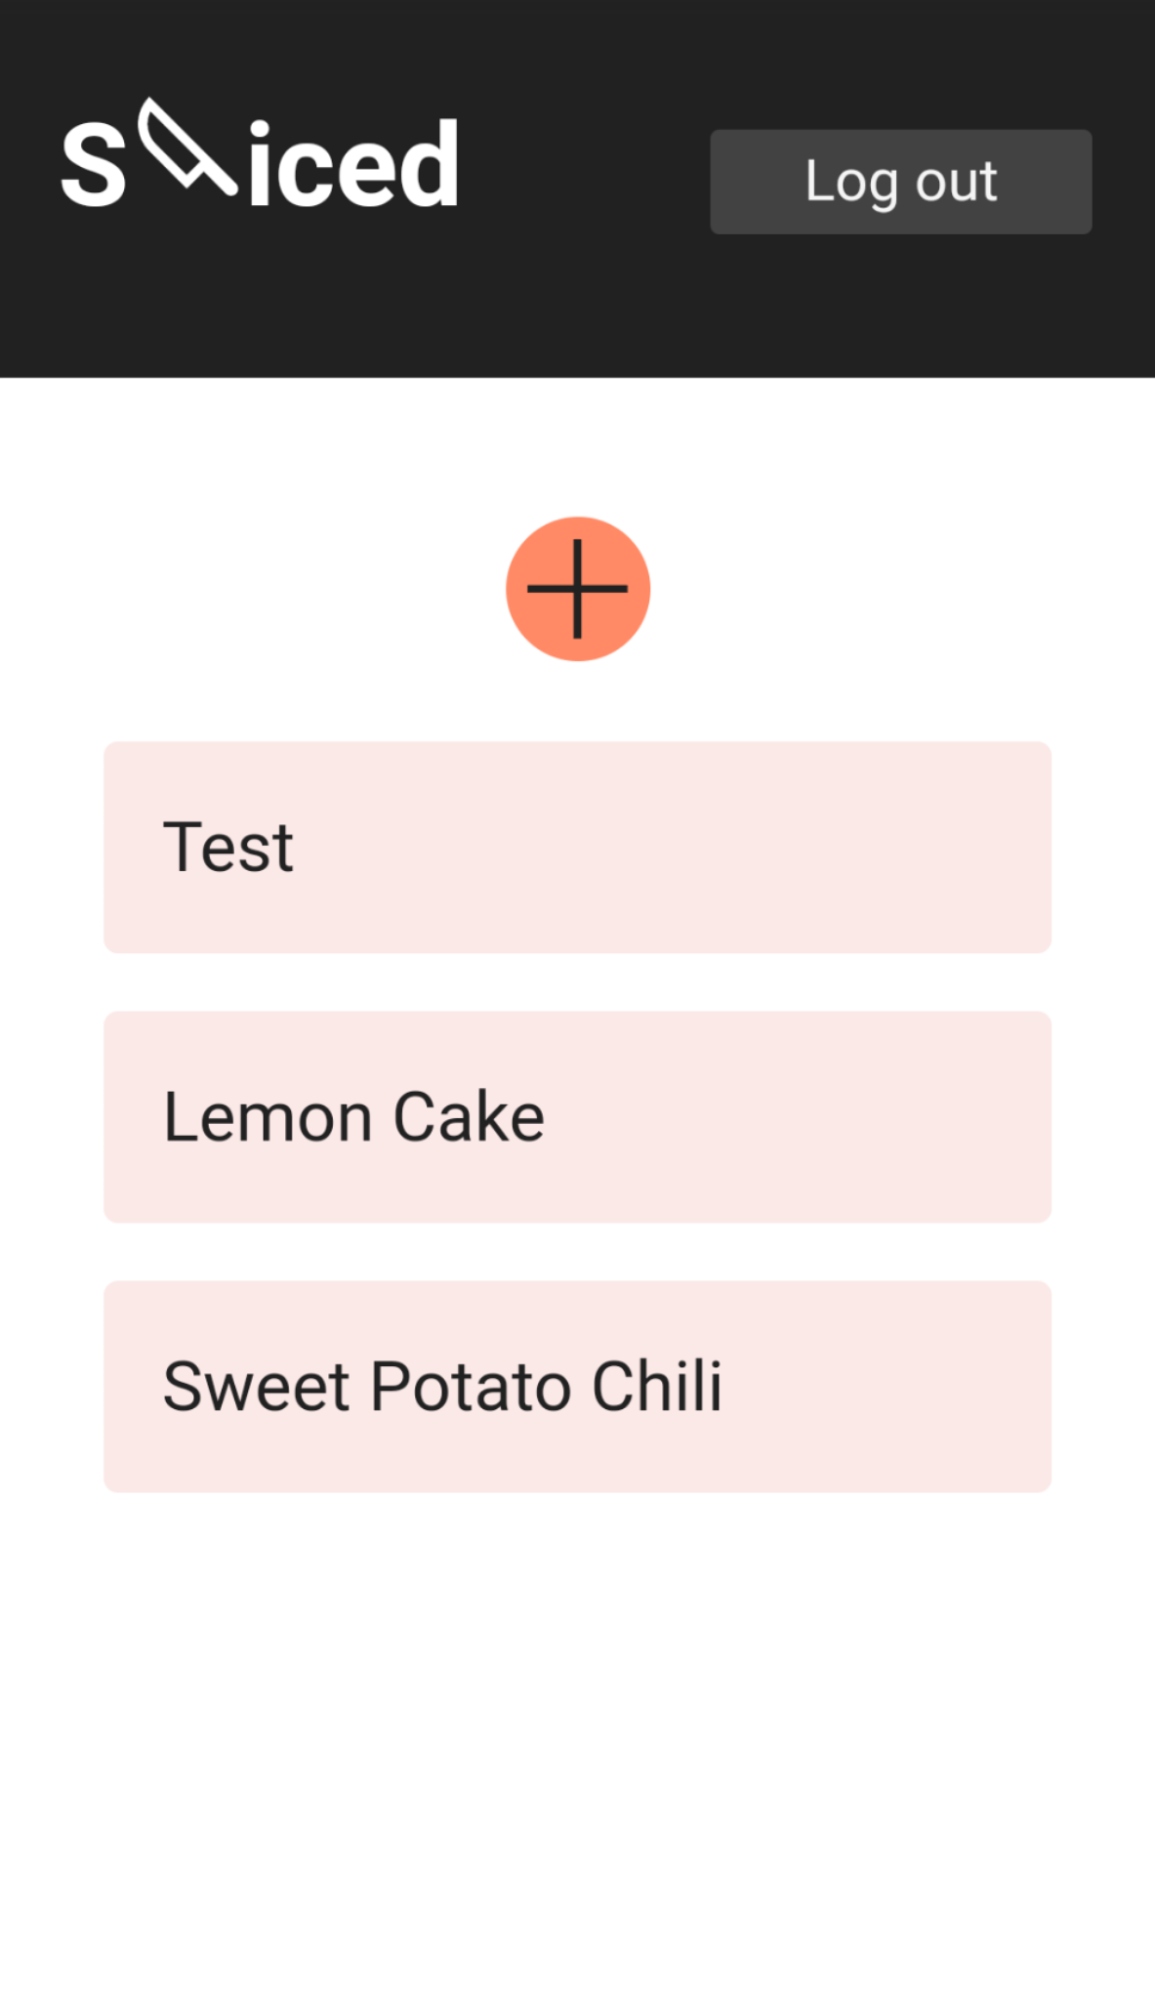 The saved recipe feature of Sliced, a recipe app